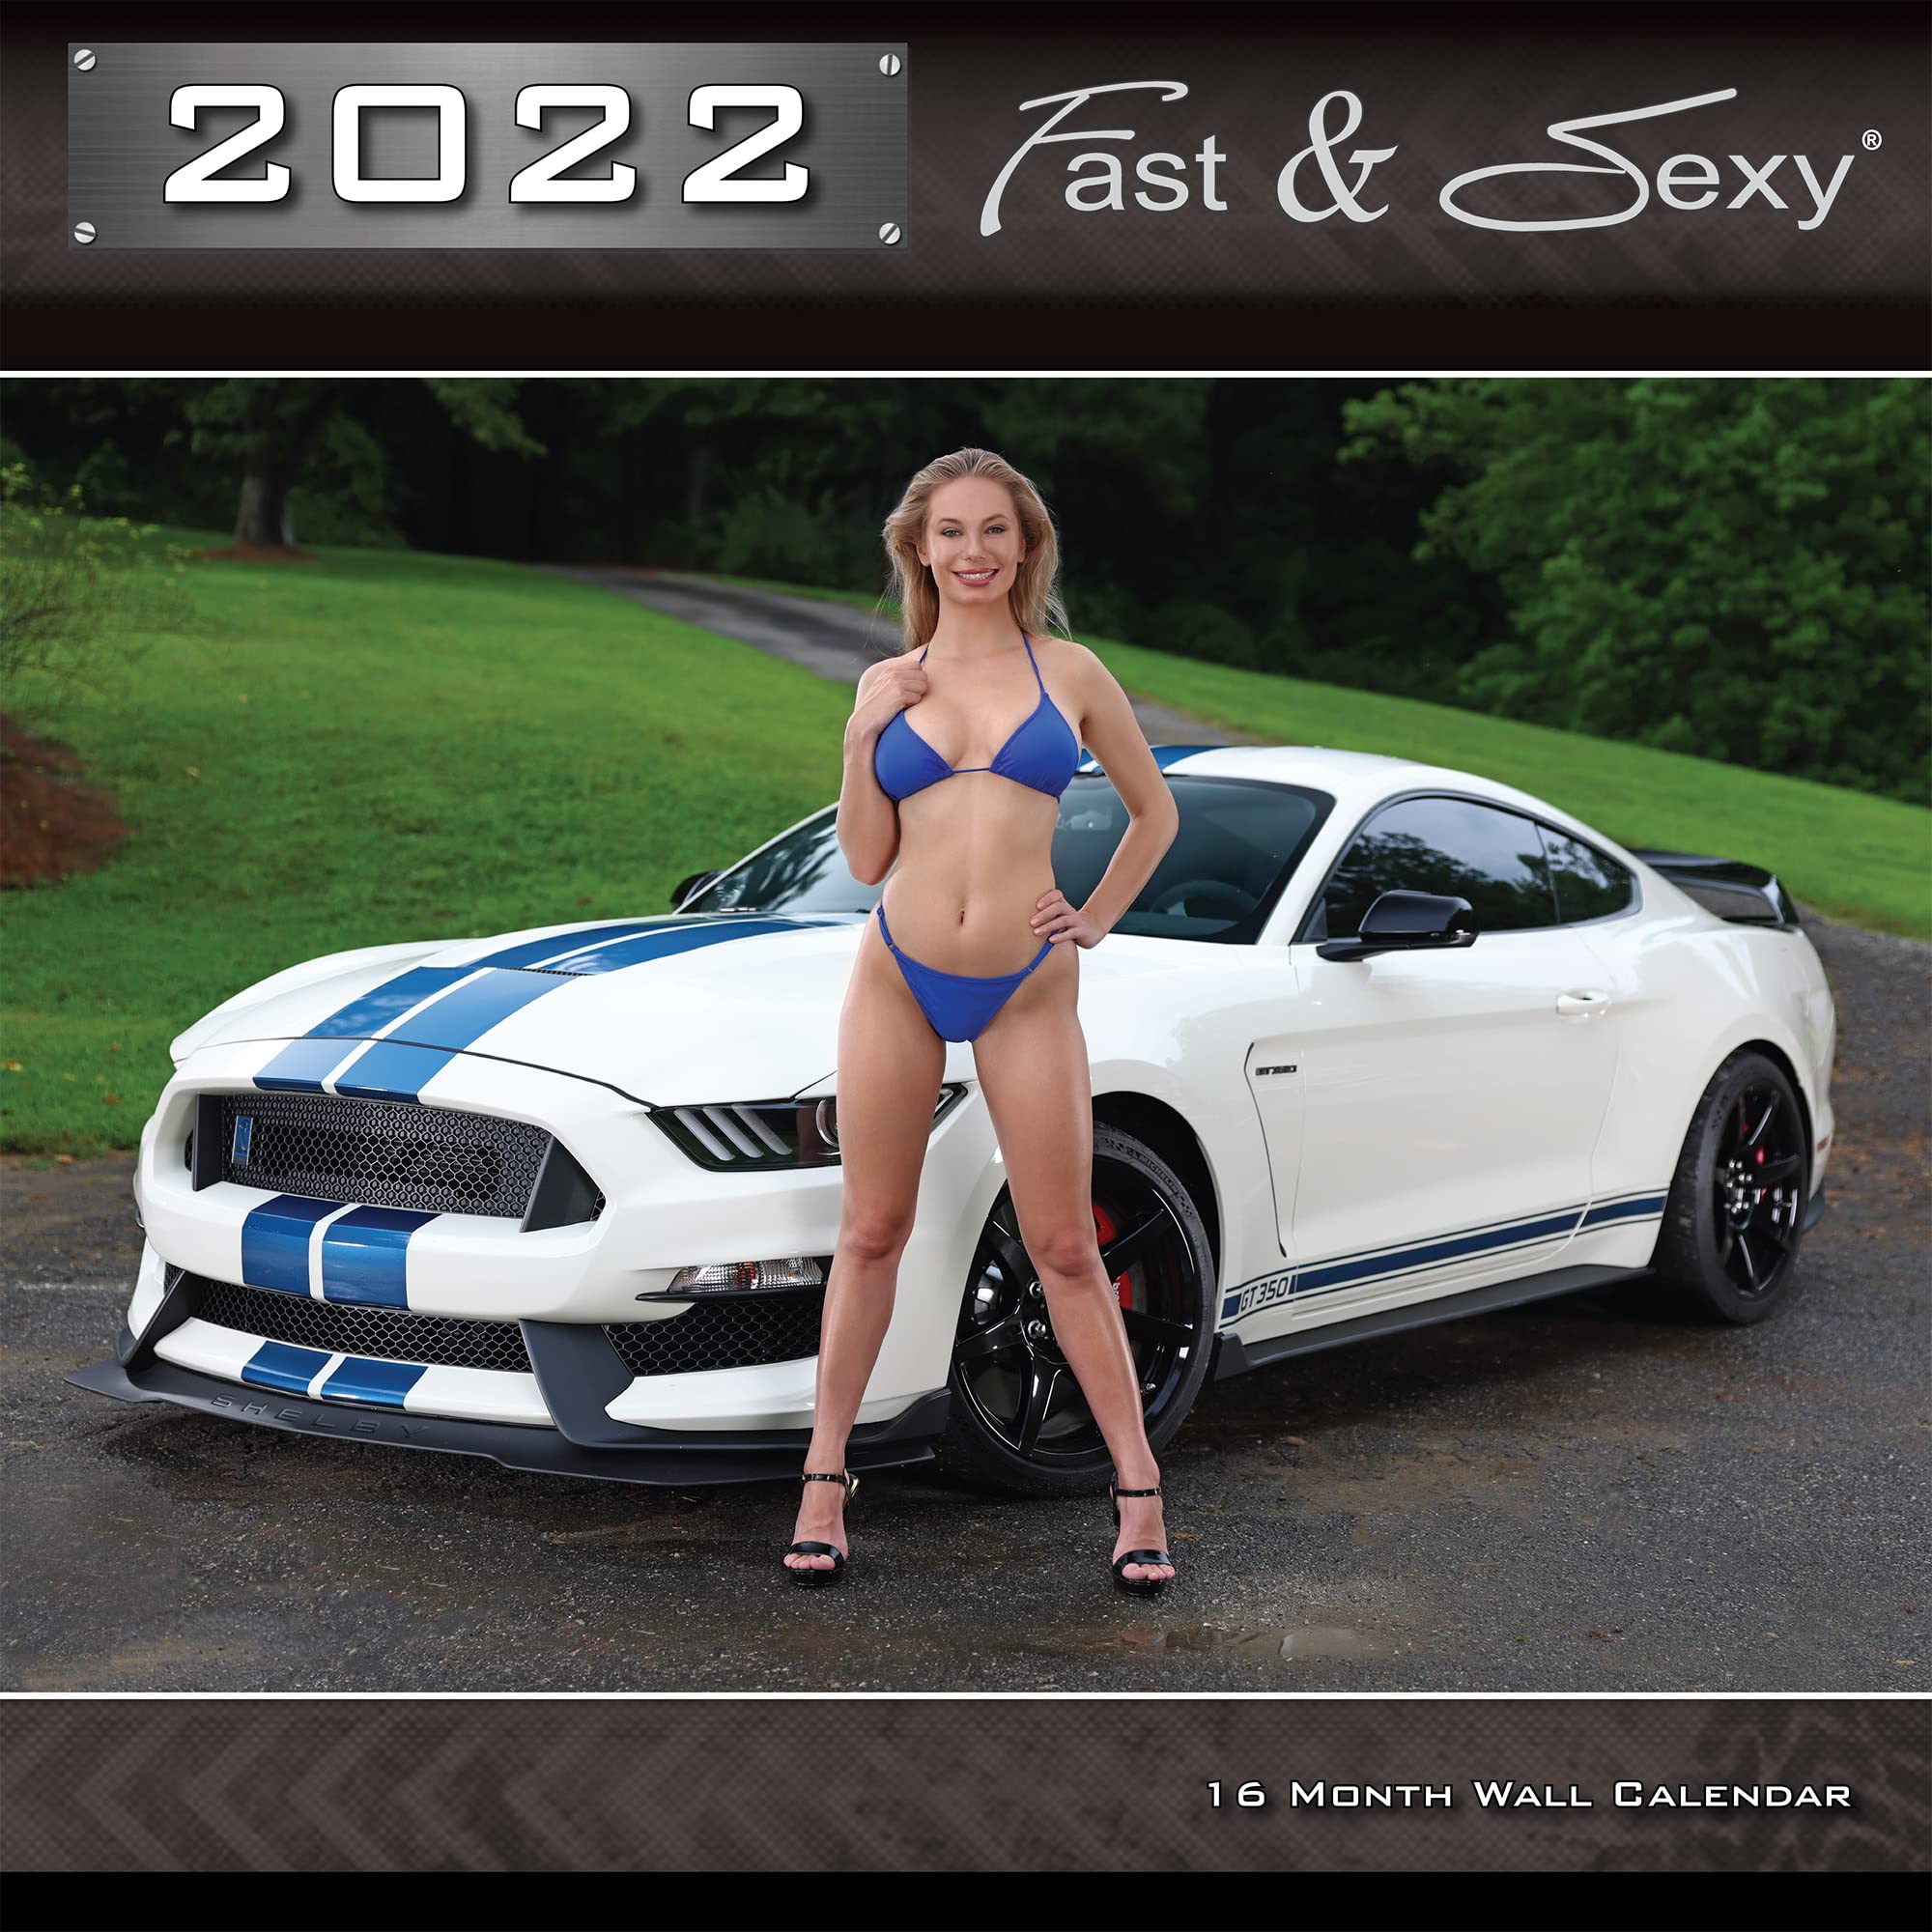 dianne affeldt recommends Fast And Sexy